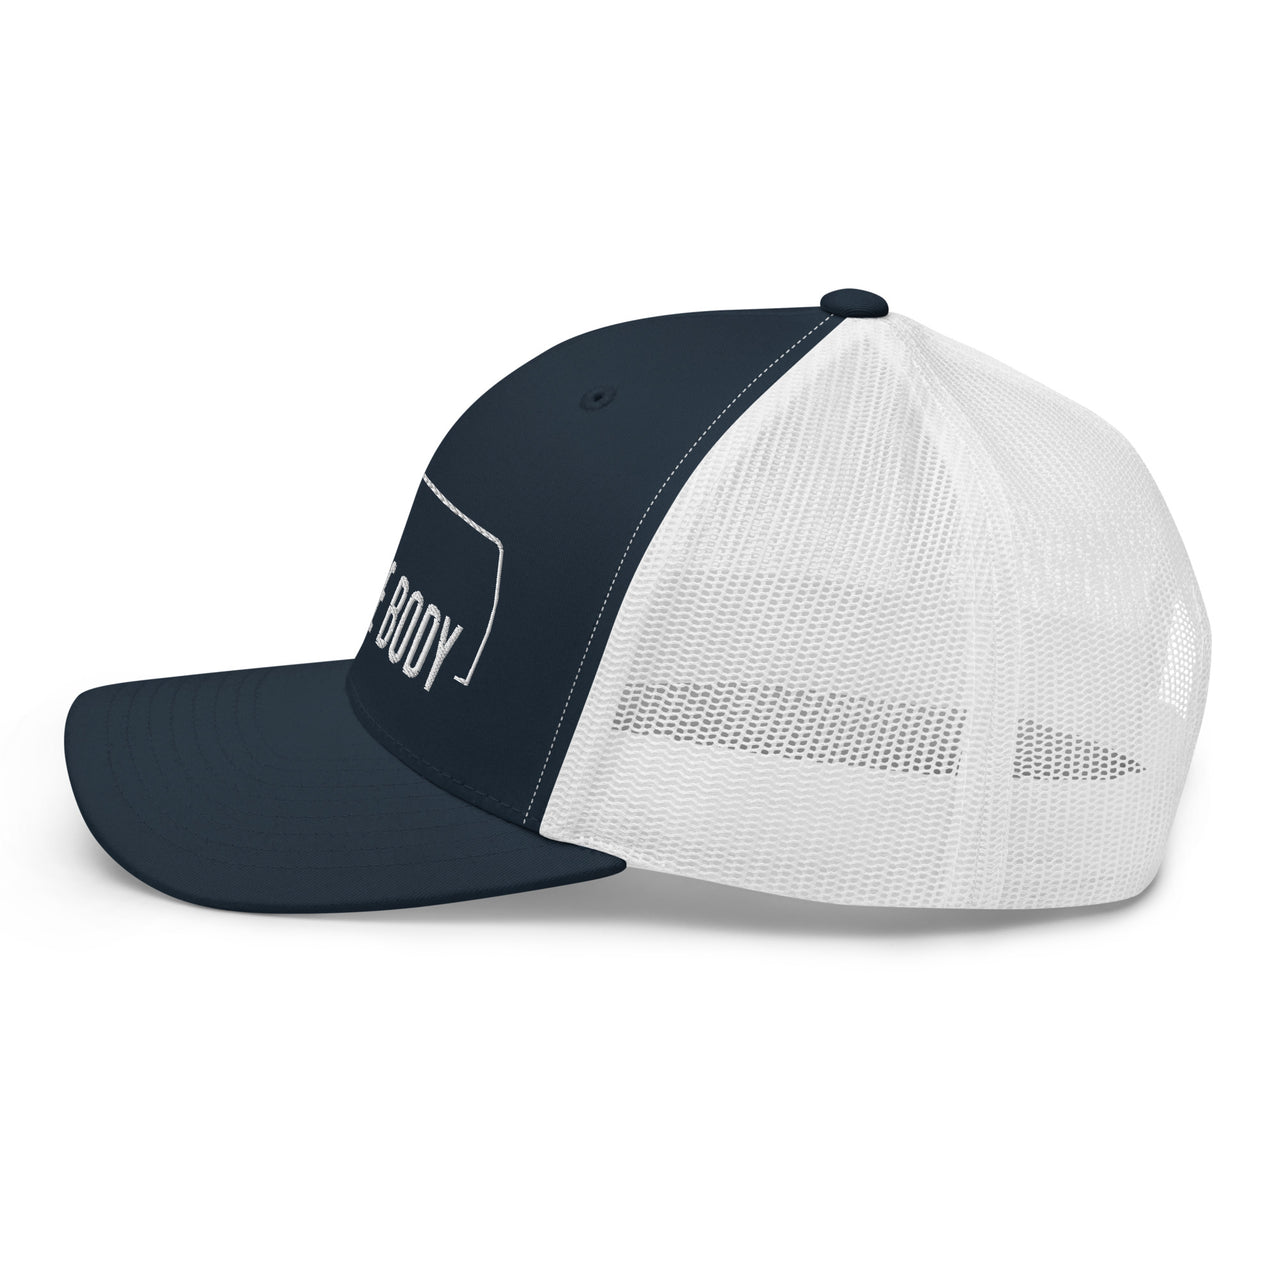 side view of a Square body K5 blazer trucker hat from aggressive thread in navy and white